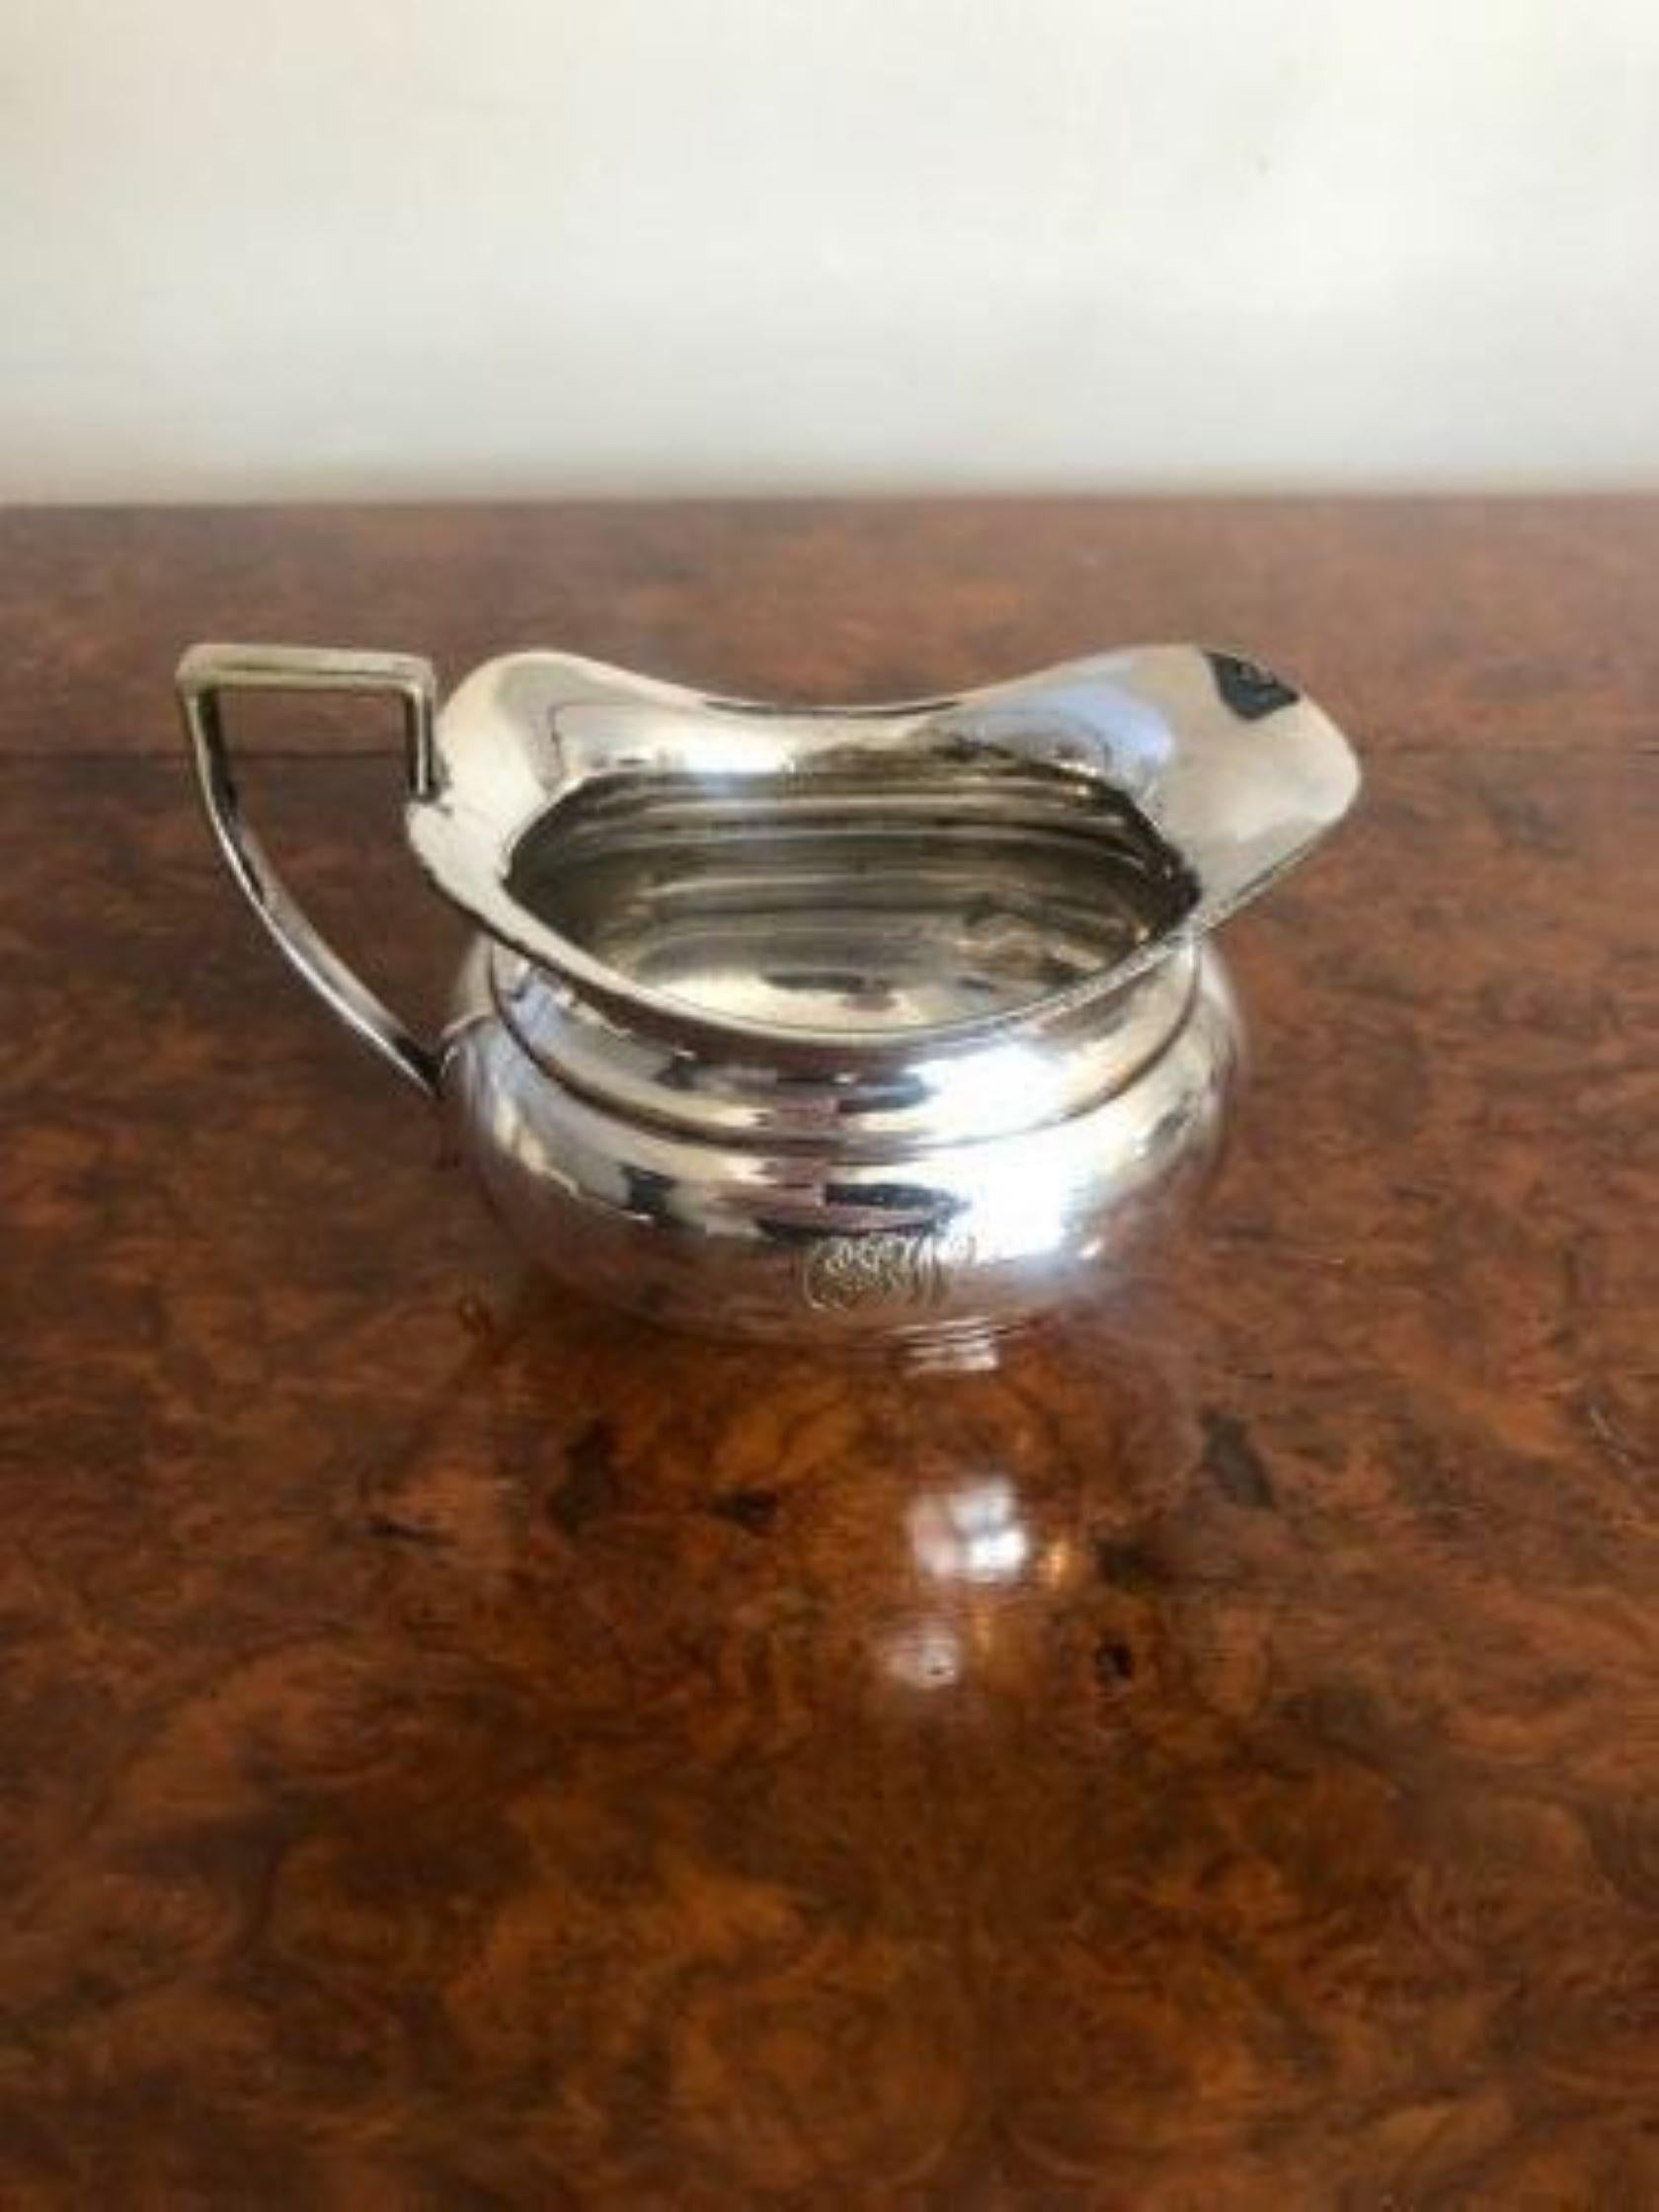 Quality antique Edwardian silver plated tea set, consisting of four silver plated tea service items, initial engraving as shown, with shaped handles